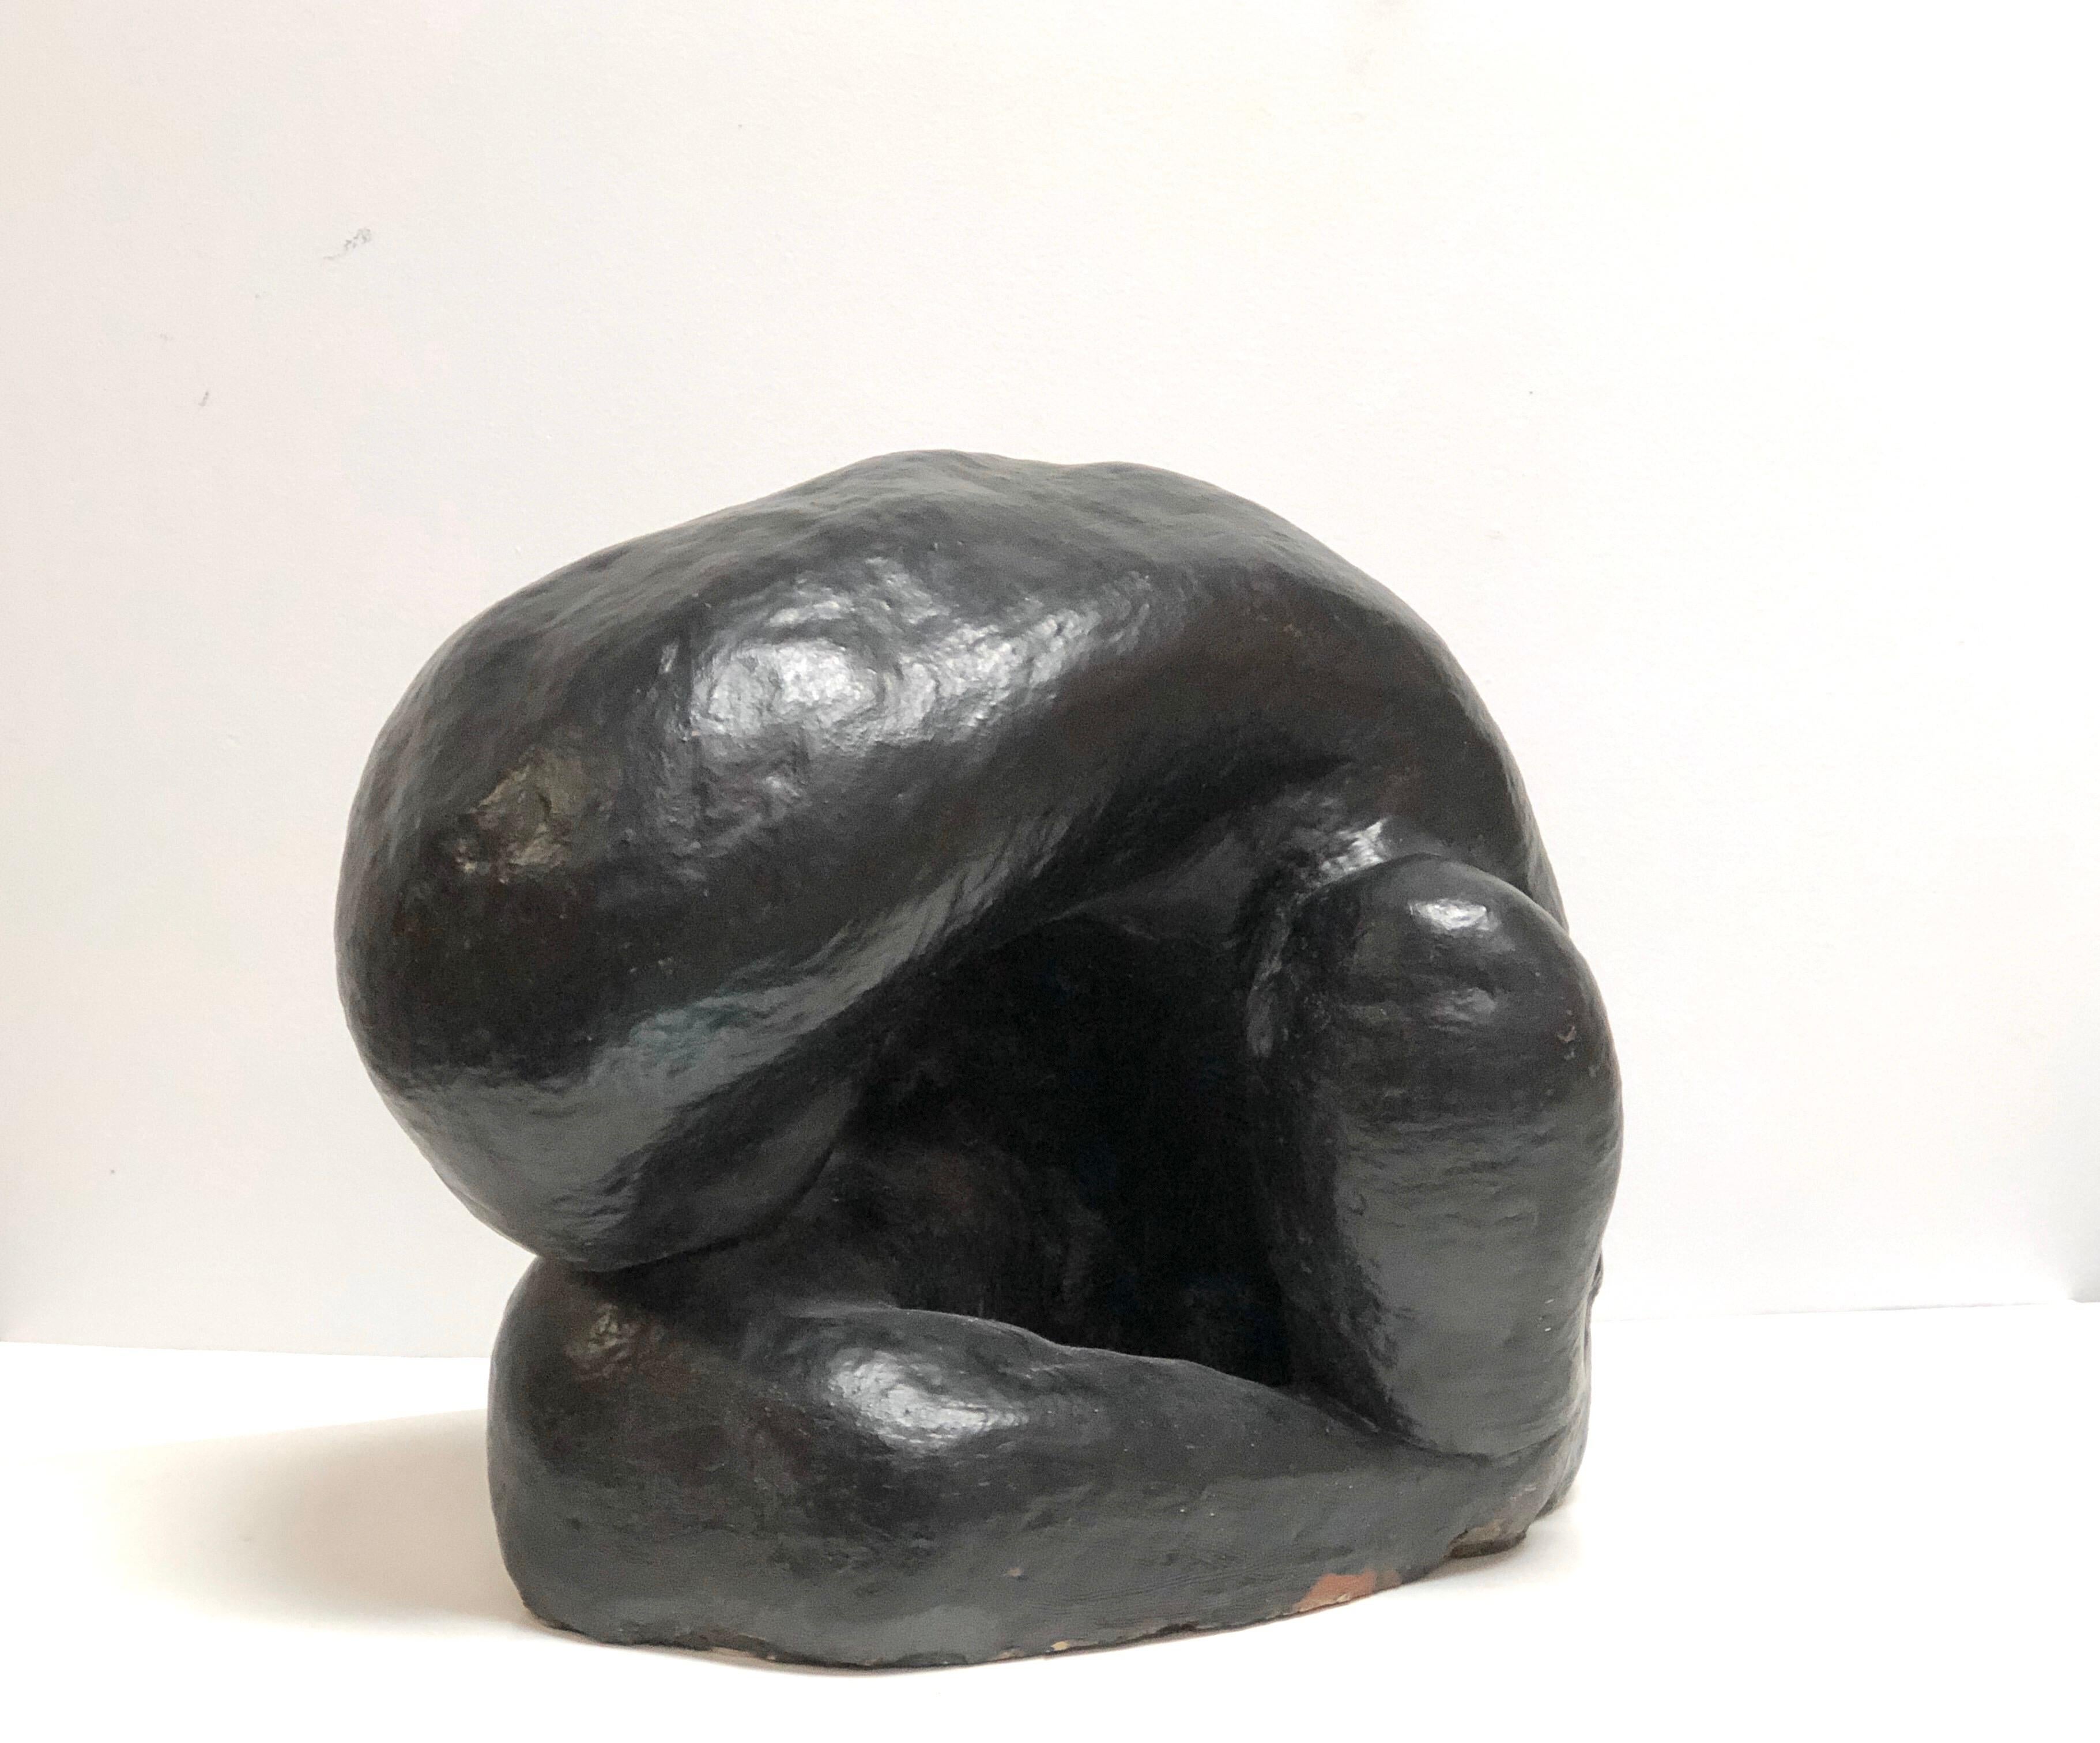 A very large one of a kind ceramic sculpture with a dark glaze. Biomorphic shape that while insinuating the human form is deprived of detail and specifics. The glaze is a dark bronze color.